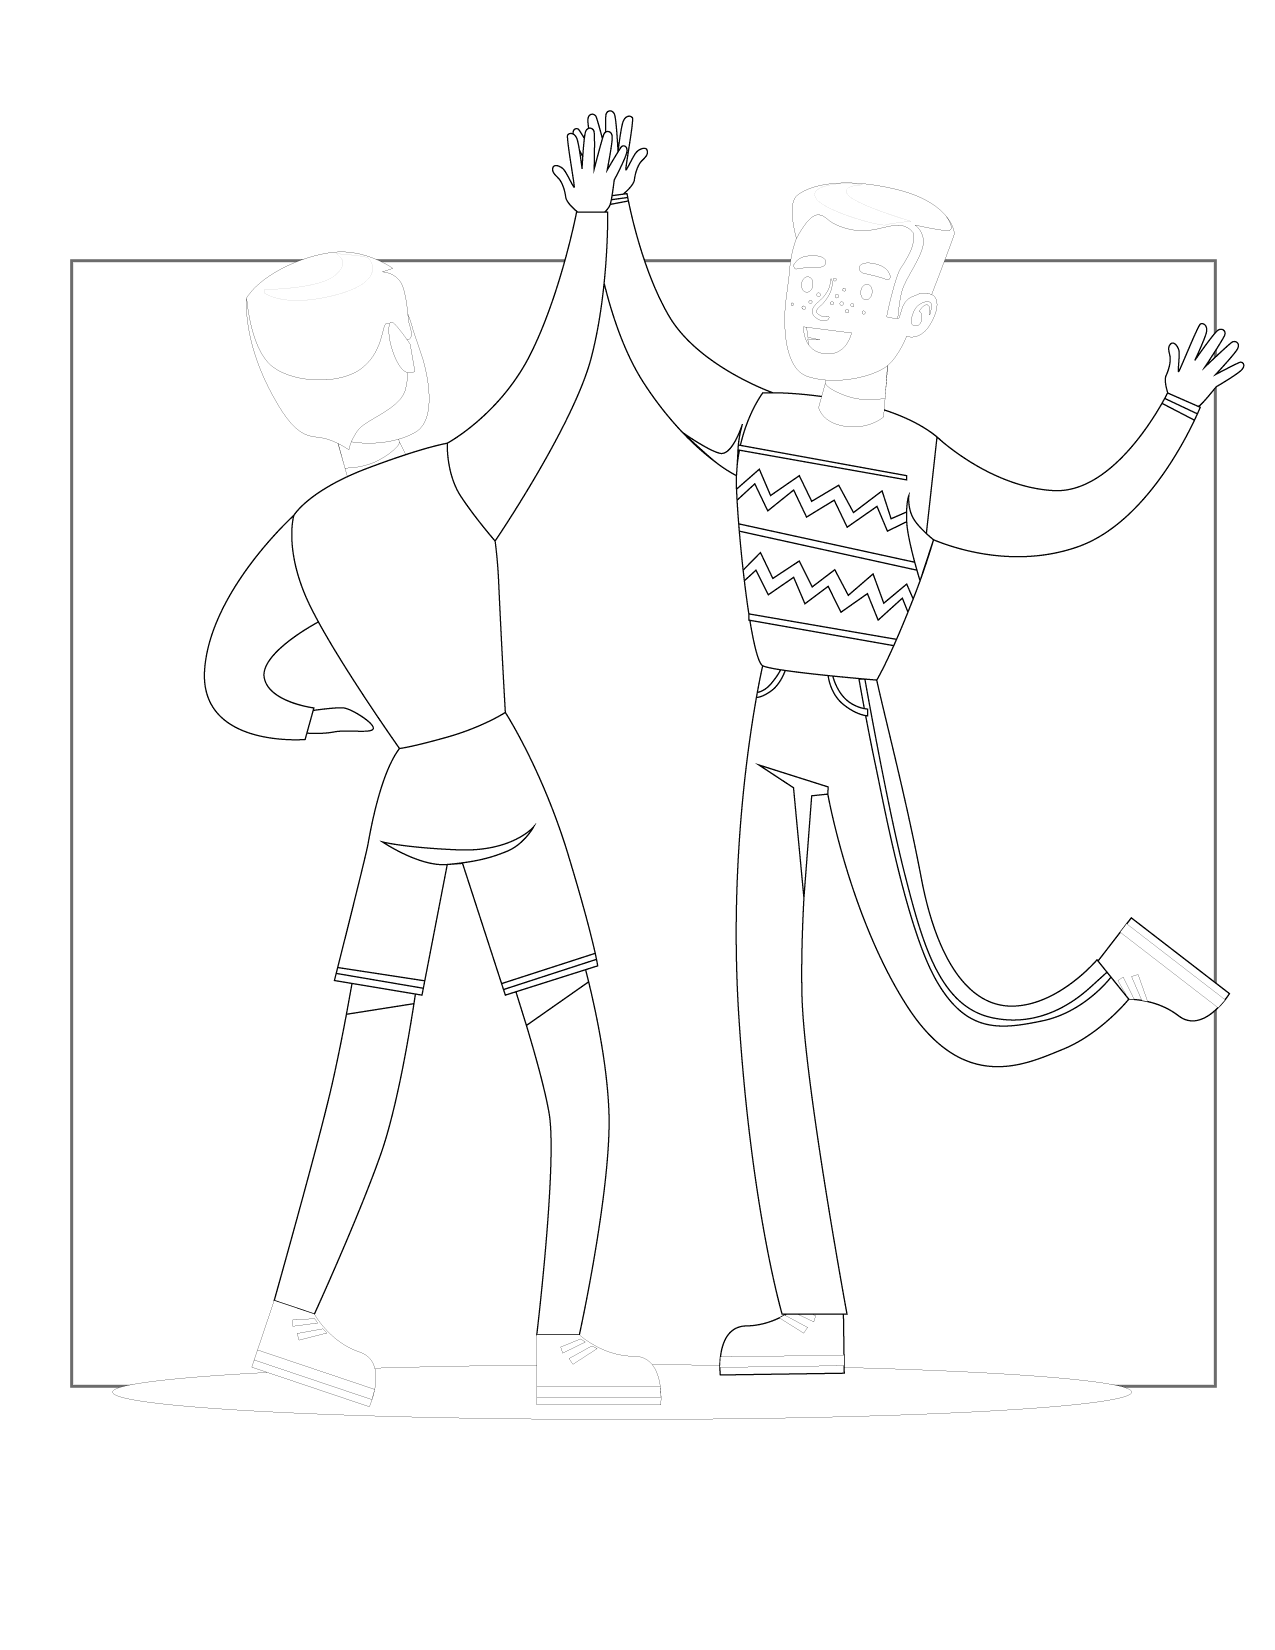 Friends High Five Coloring Page